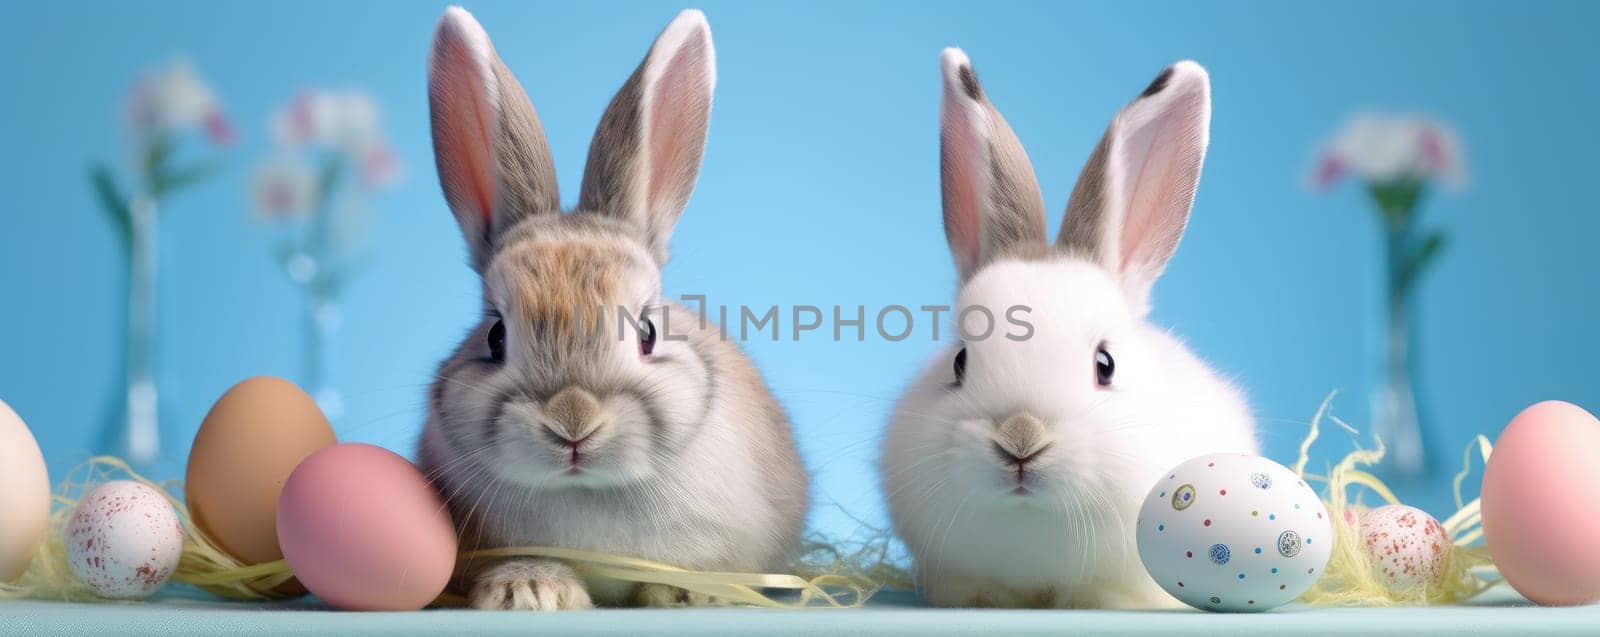 Cute fluffy bunnies playfully entertained with colorful easter egg decorations by Yurich32